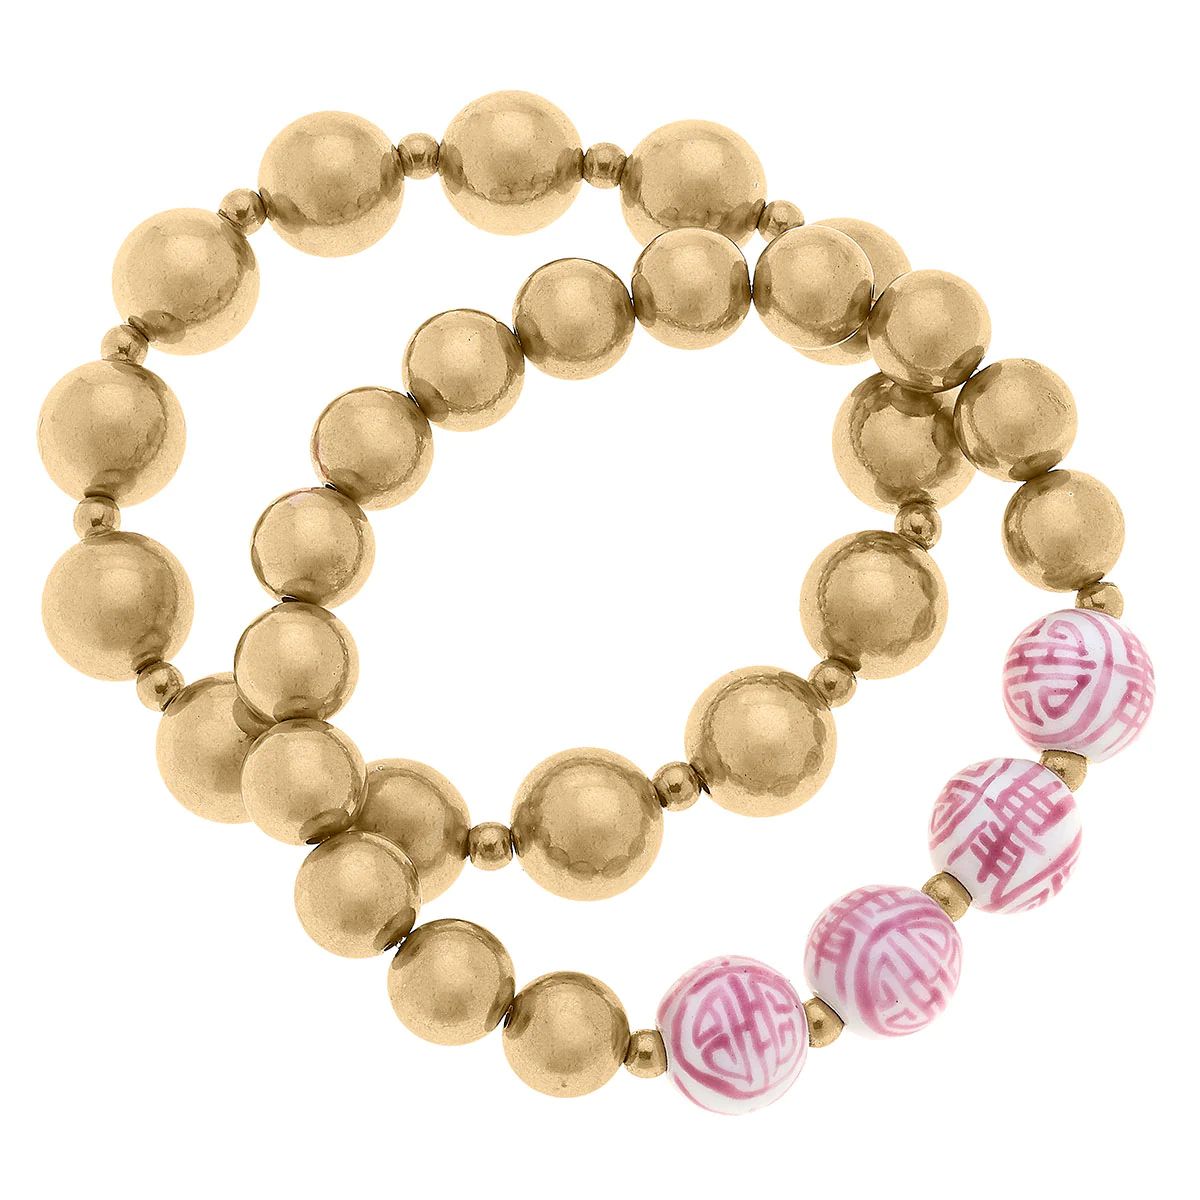 Heidi Chinoiserie & Ball Bead Stretch Bracelets in Pink & White - Set of 2 | CANVAS